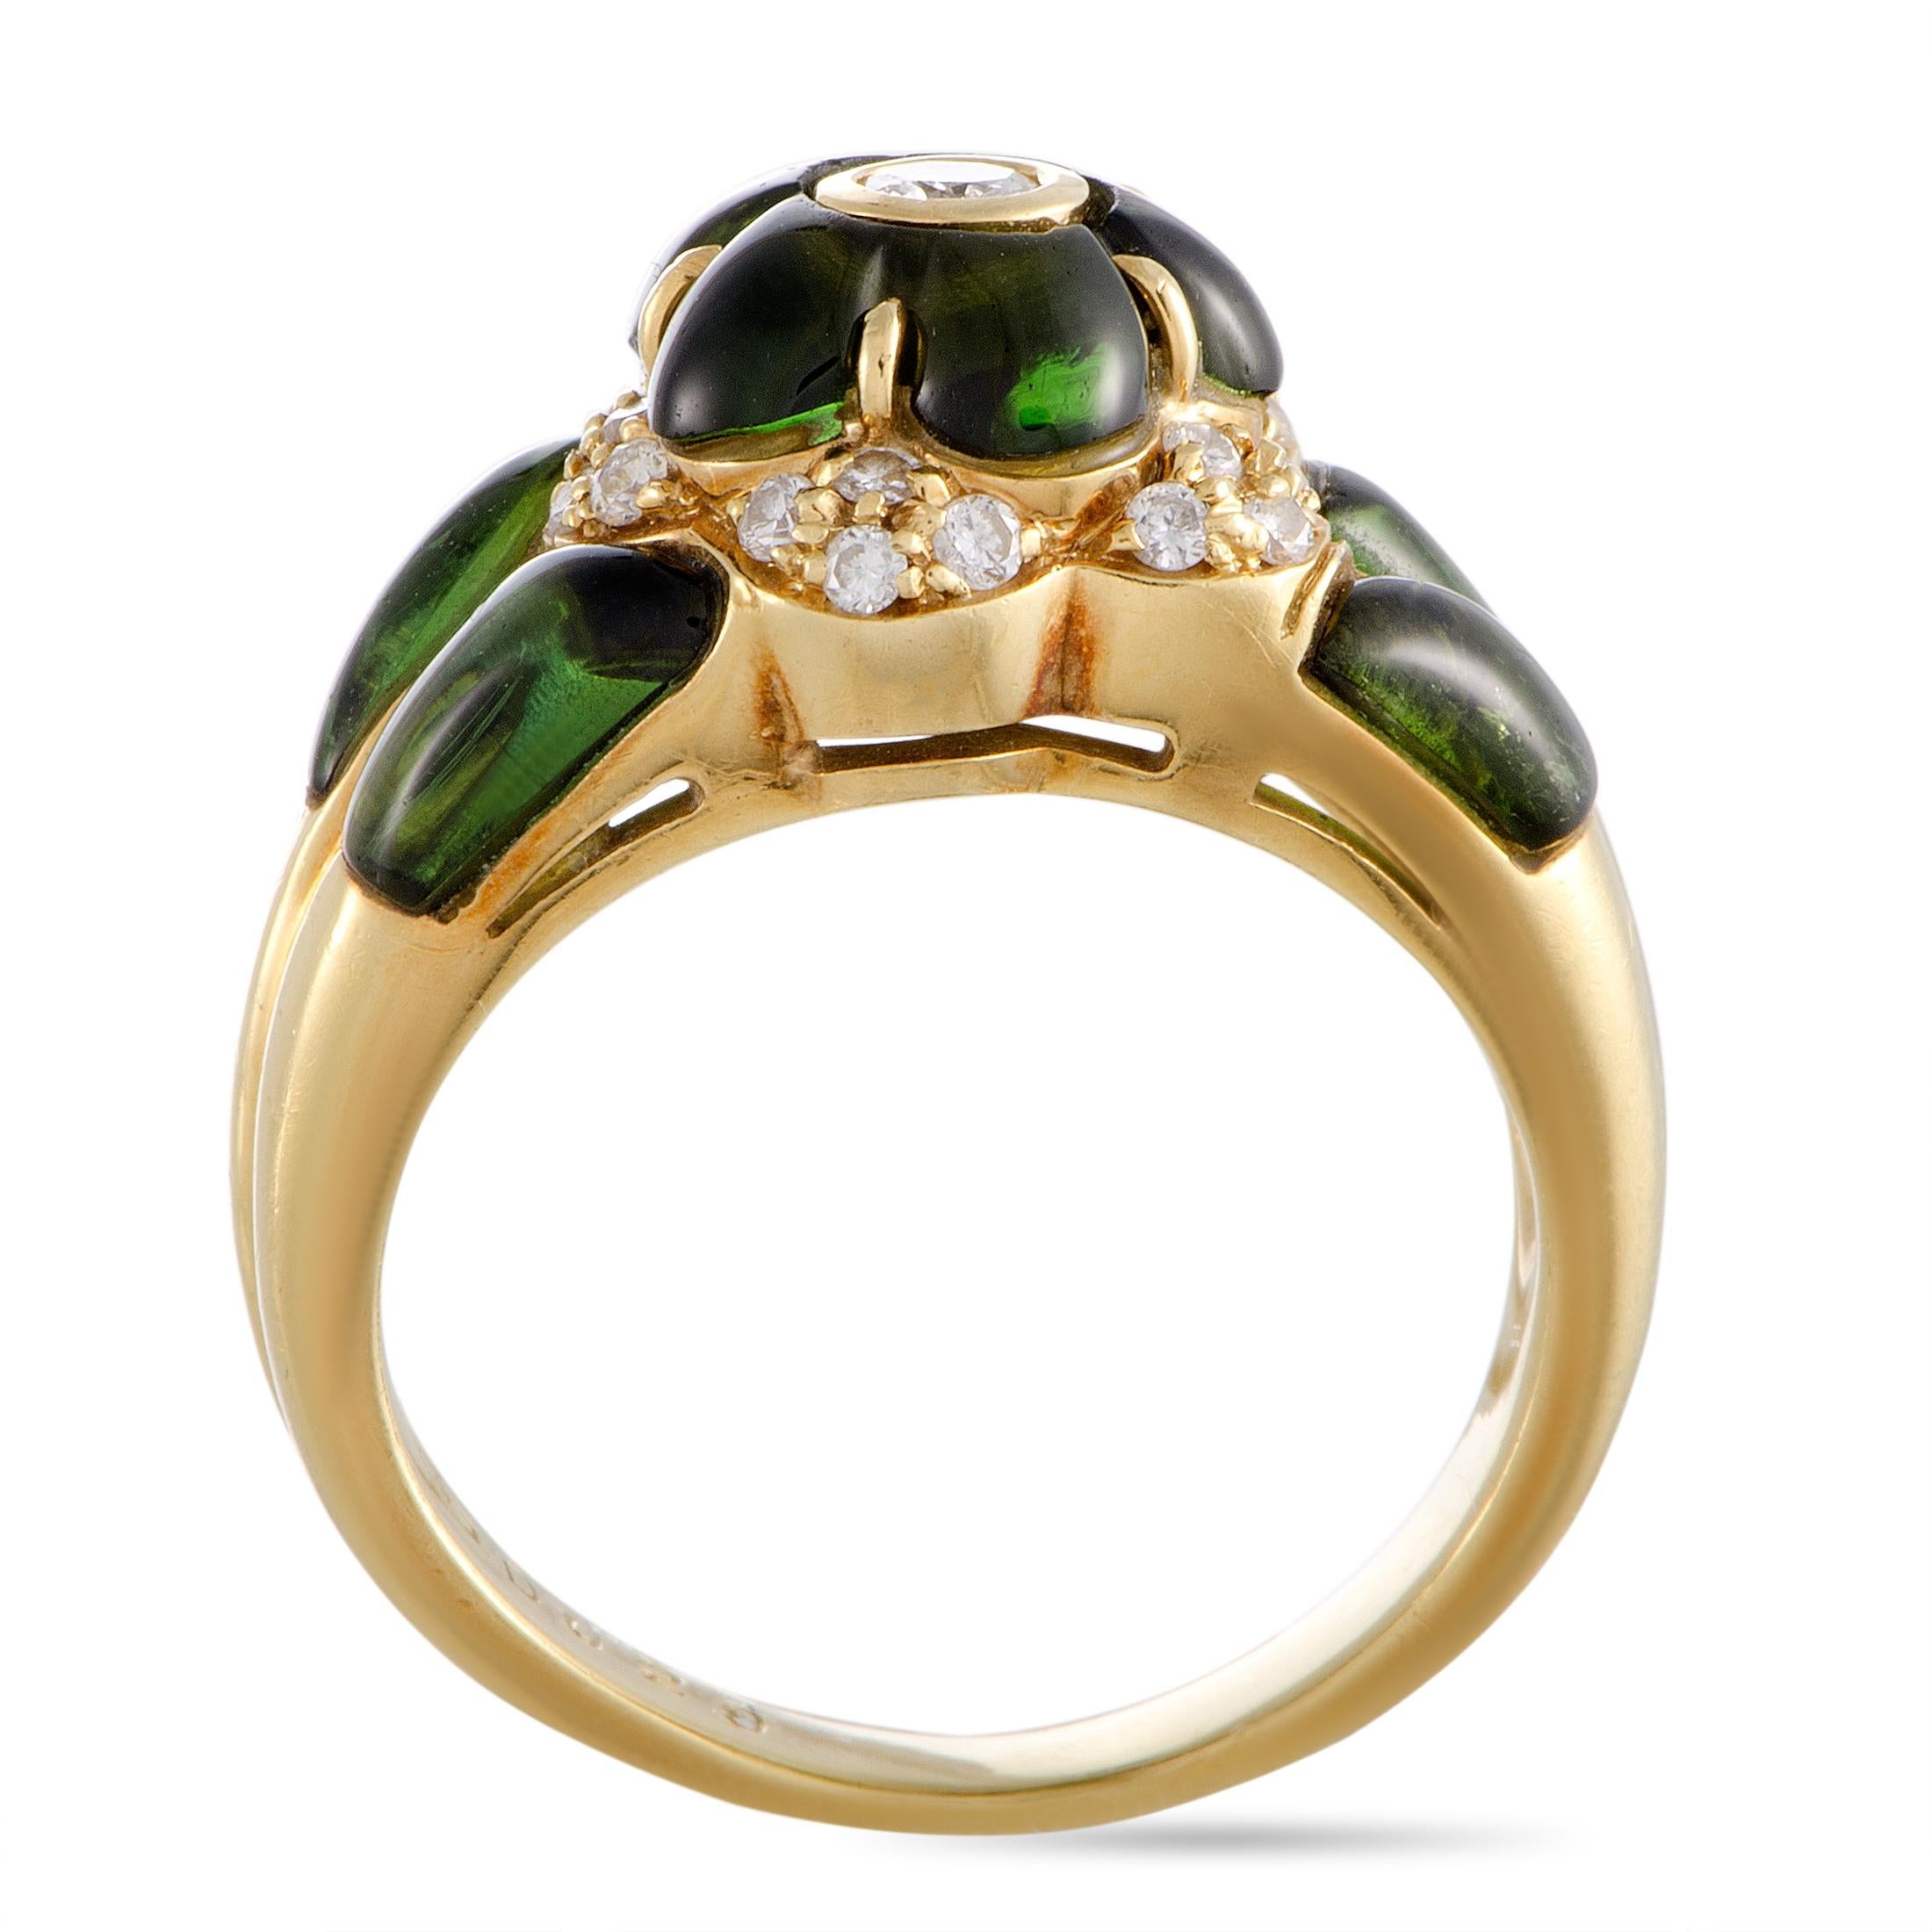 The effervescent radiance of 18K yellow gold is attractively accentuated by the compelling diamond and green tourmaline stones in this wonderful ring that is decorated with a gorgeous flower motif. The ring is set with a total of 0.29 carats of